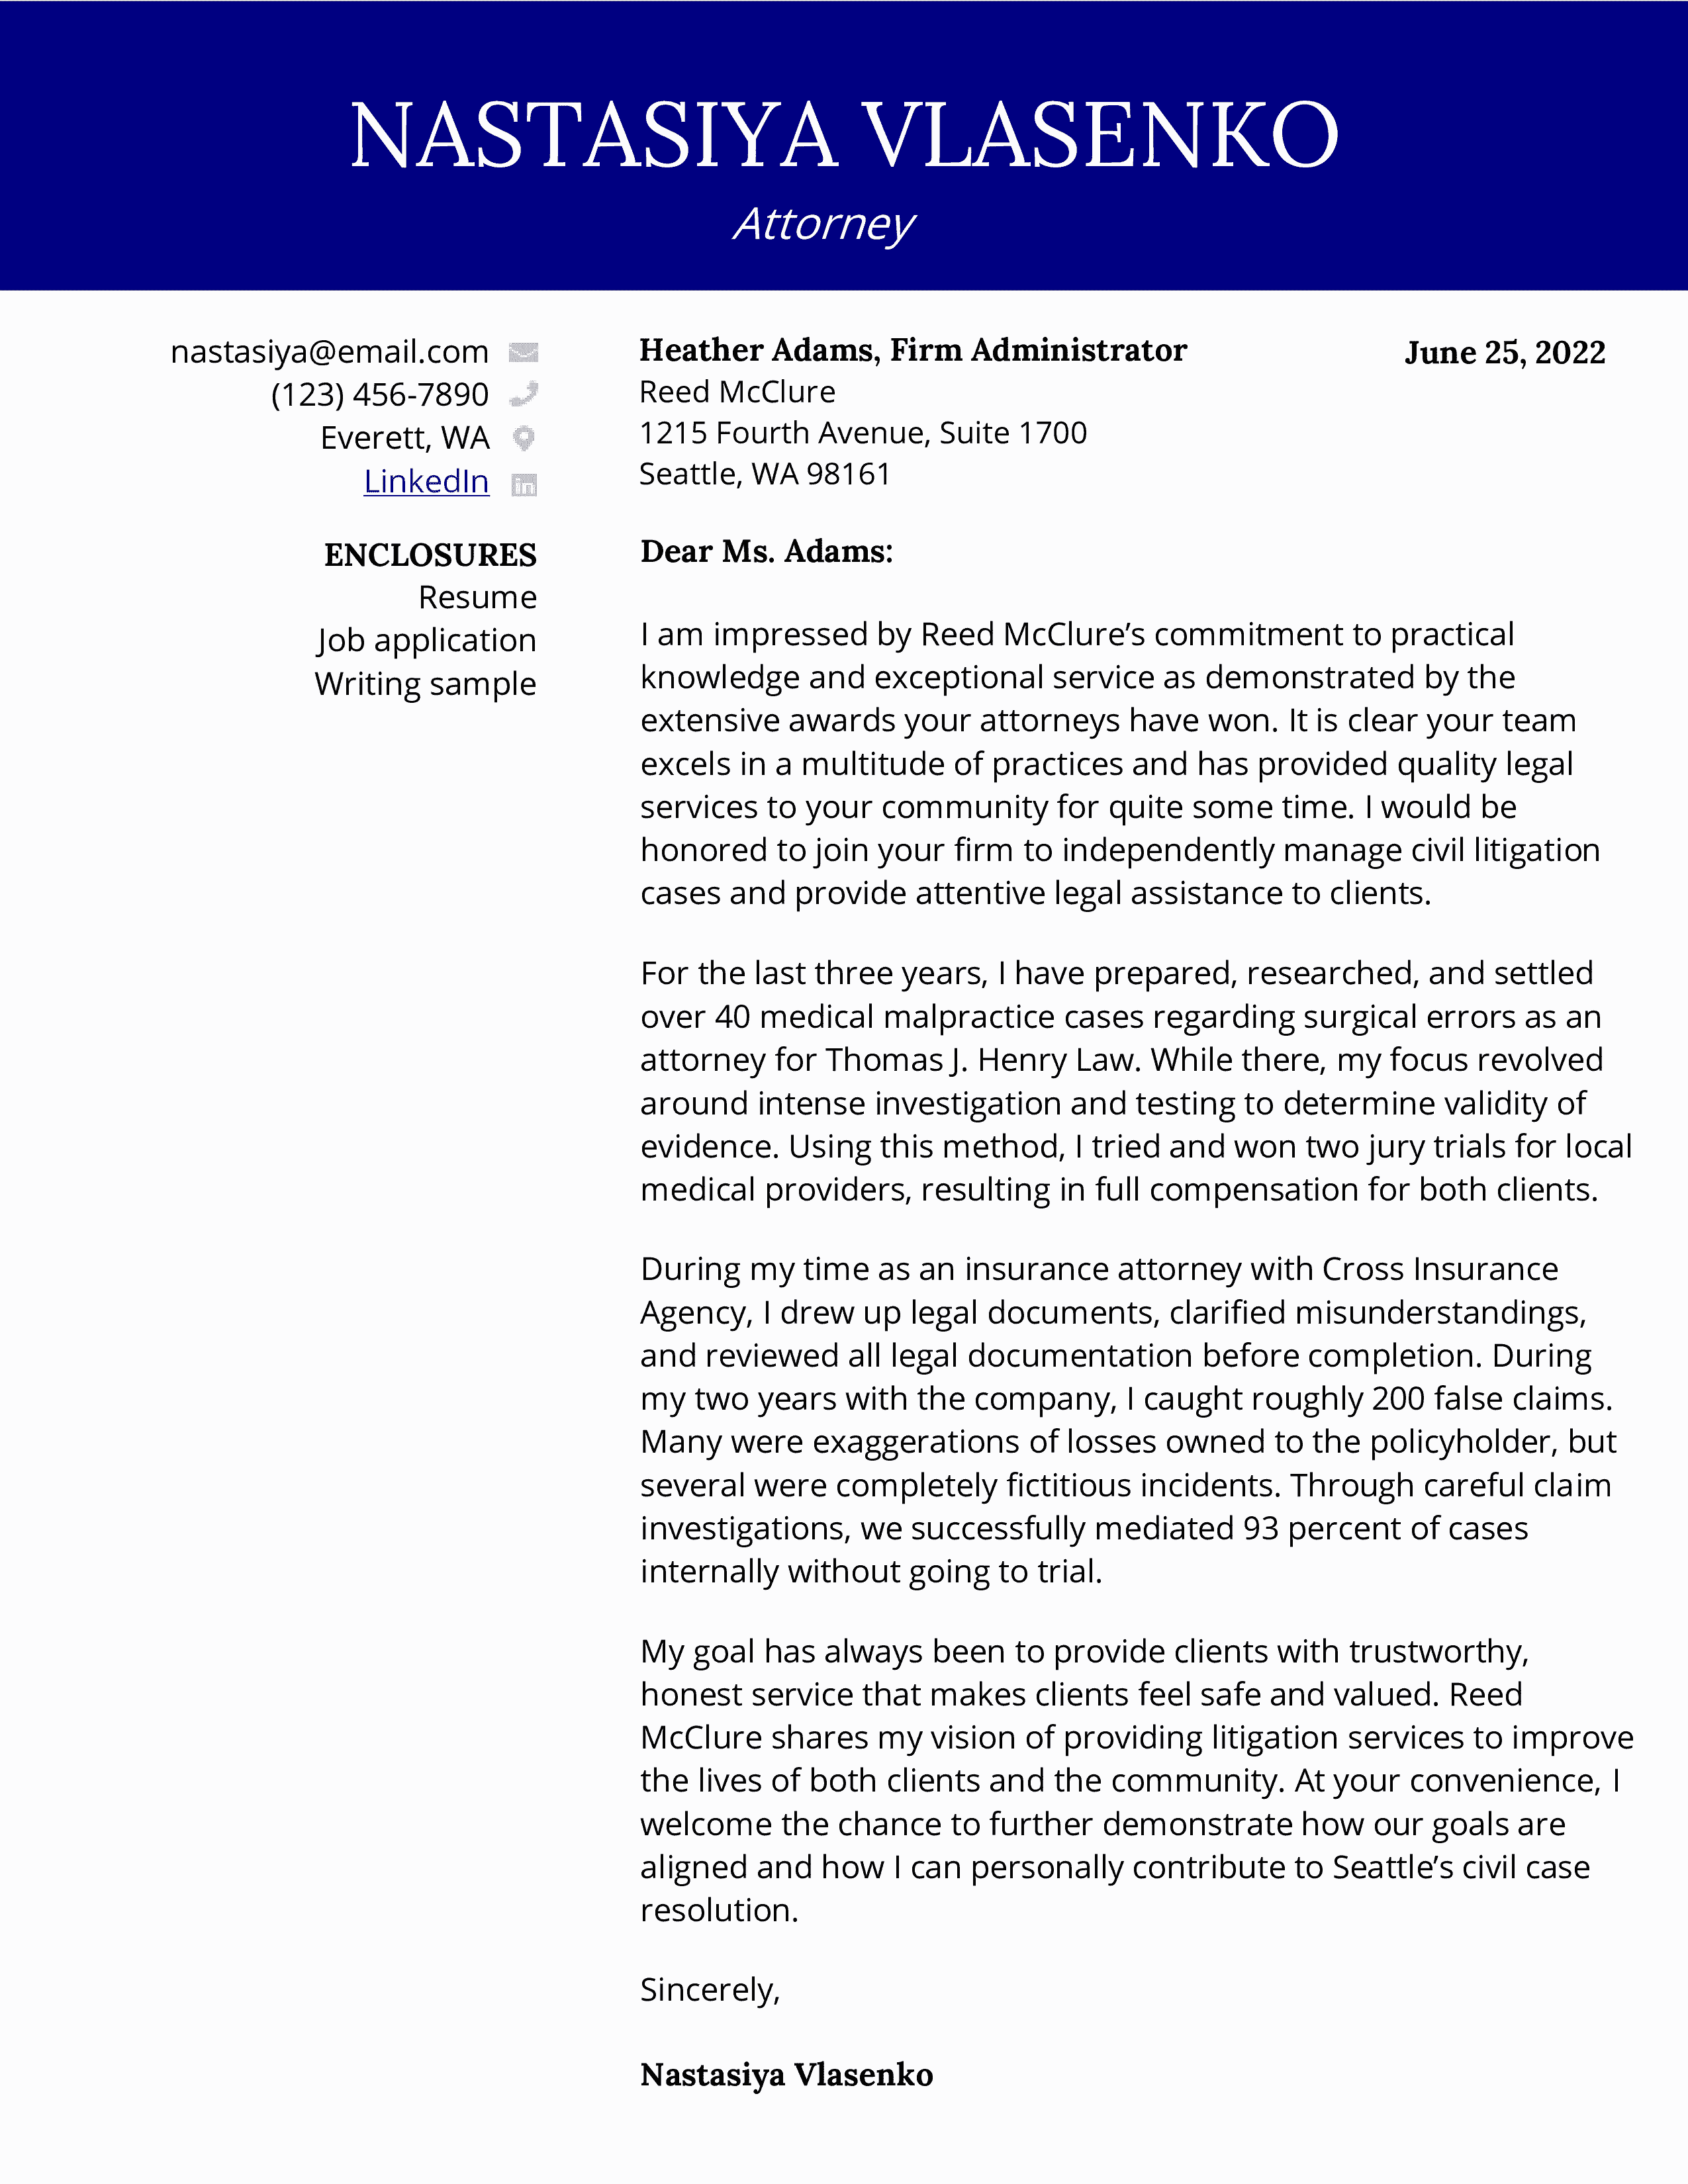 Attorney cover letter with blue header